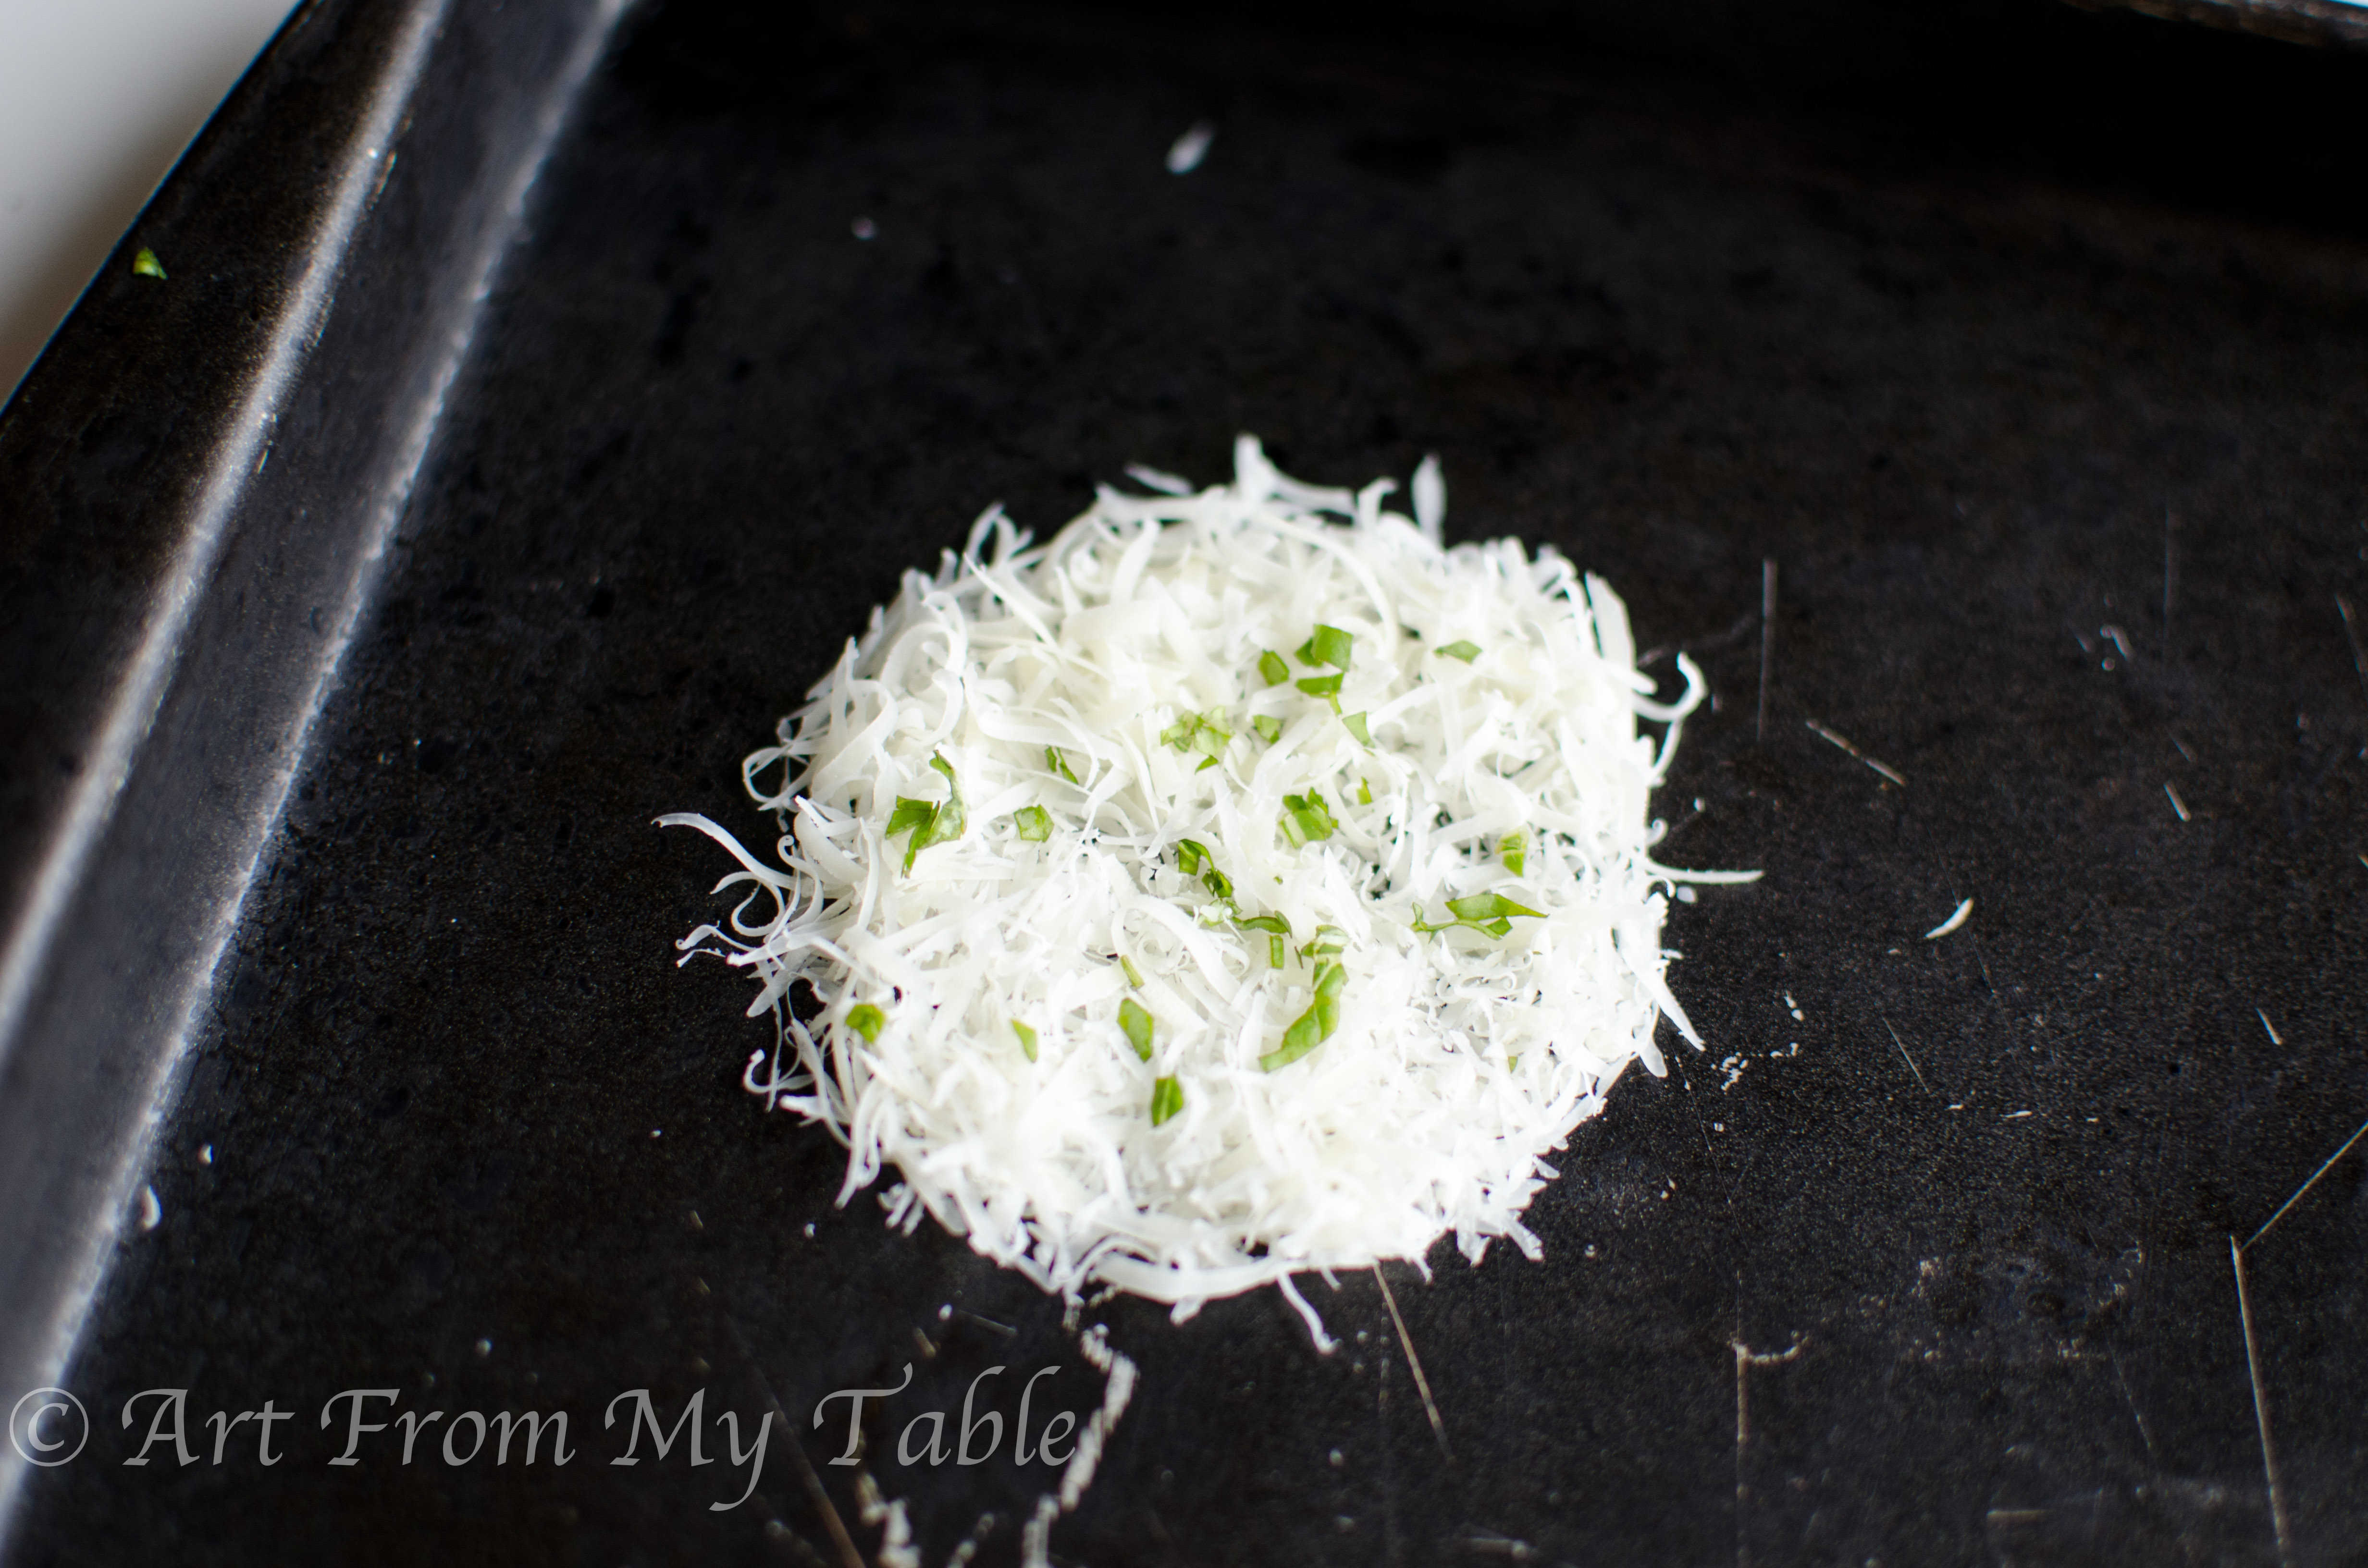 Shredded parmesan cheese formed into a circle on a baking sheet, chopped fresh basil on top. 